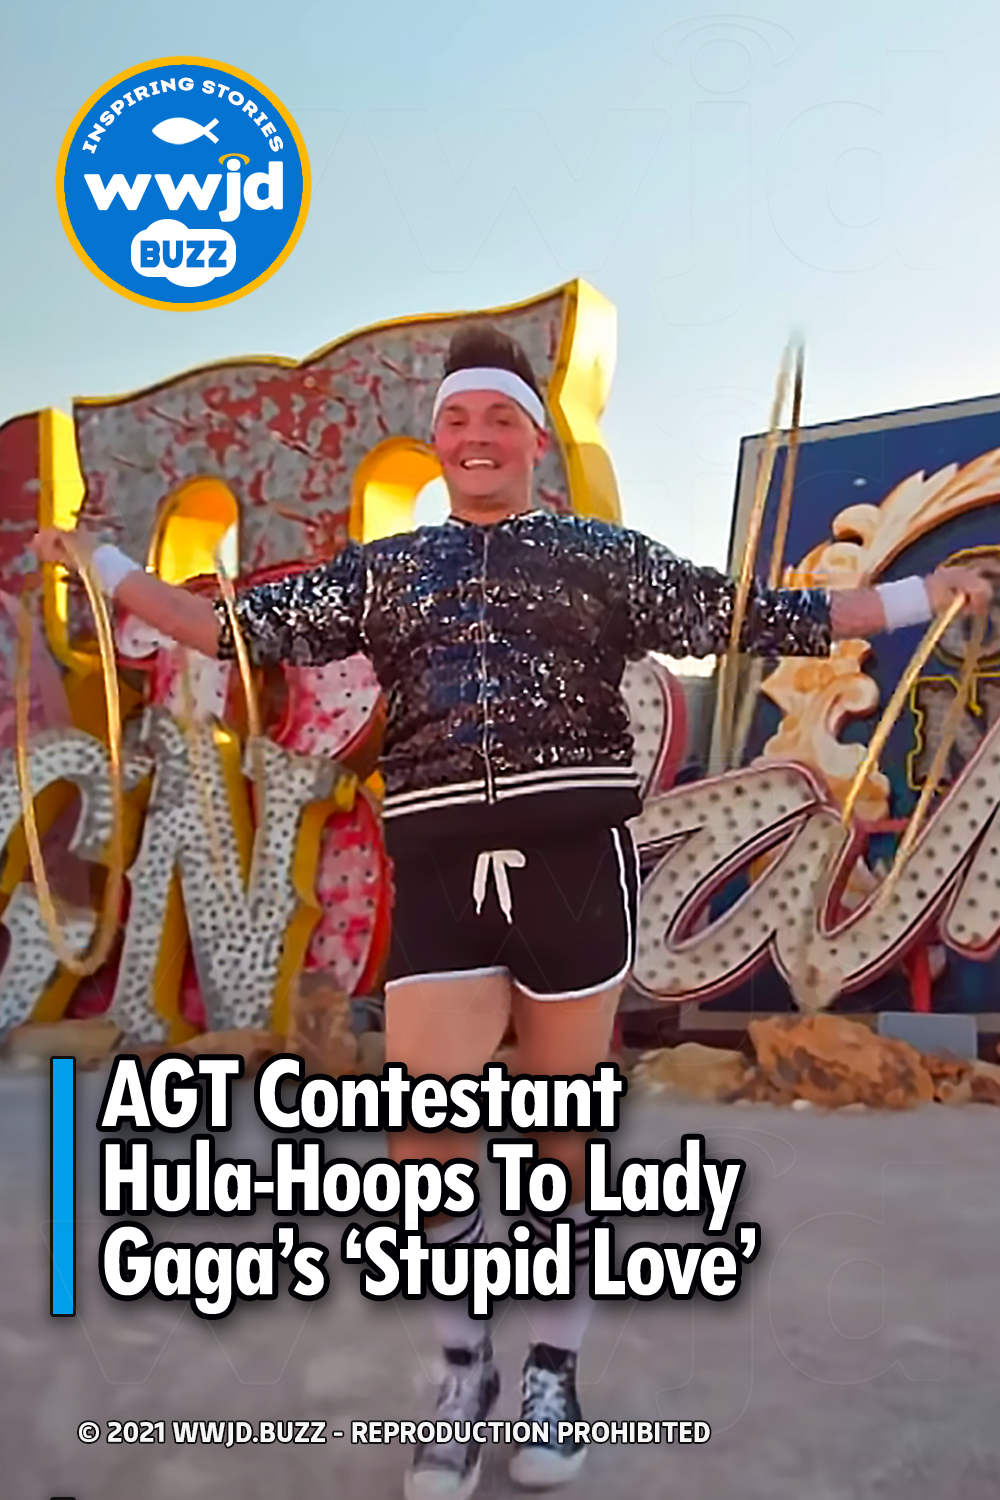 AGT Contestant Hula-Hoops To Lady Gaga’s ‘Stupid Love’